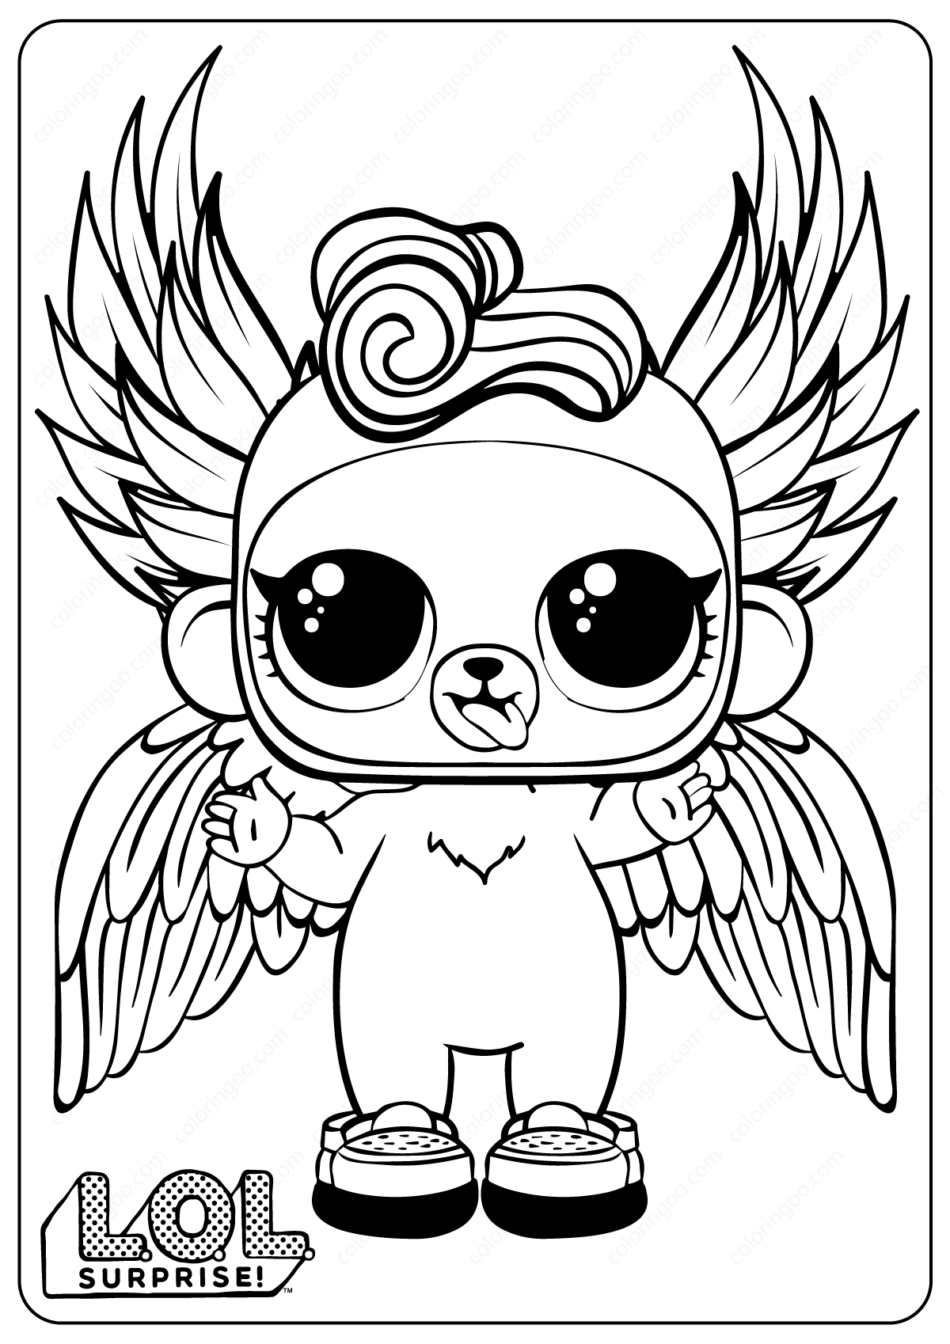 Get Lol Coloring Pages To Print Images Coloring Pages